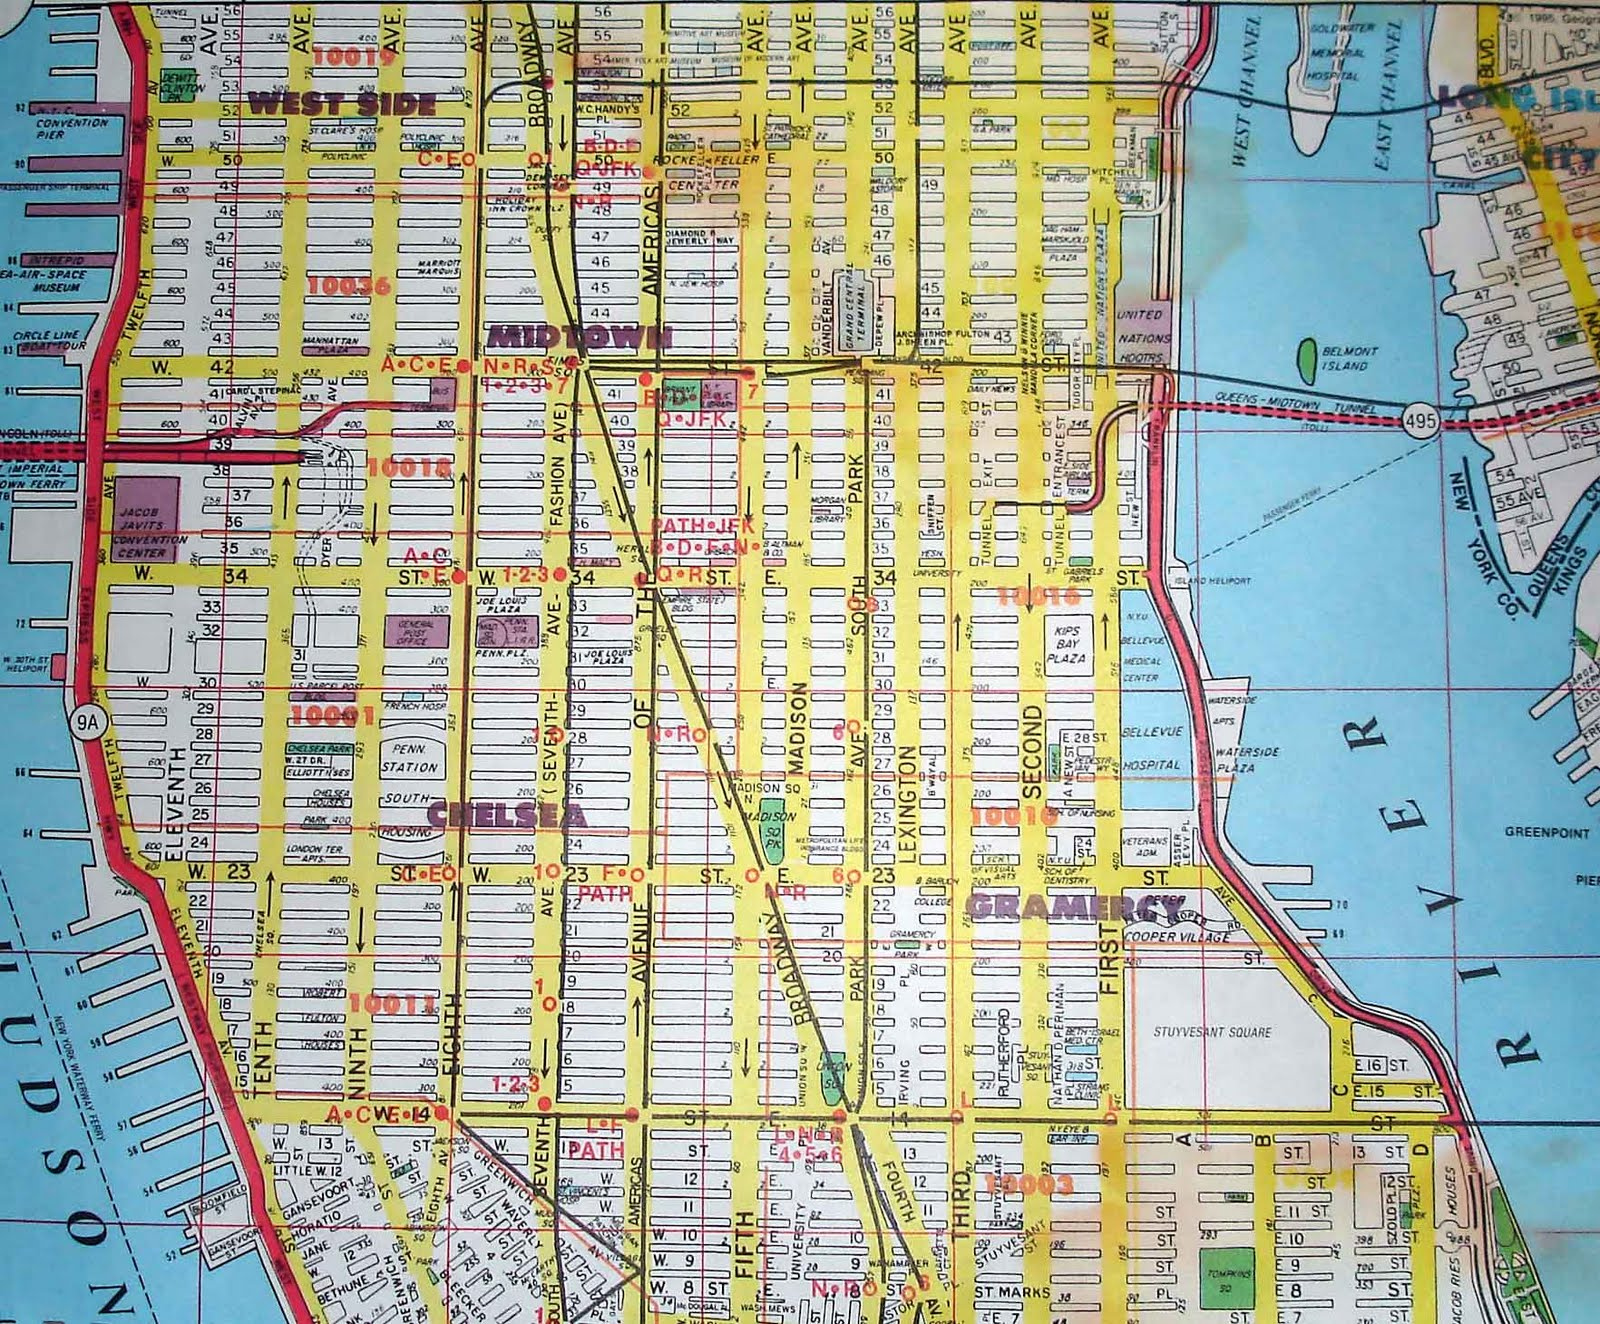 Map Of Midtown Manhattan Area Map Of Manhattan City Pictures